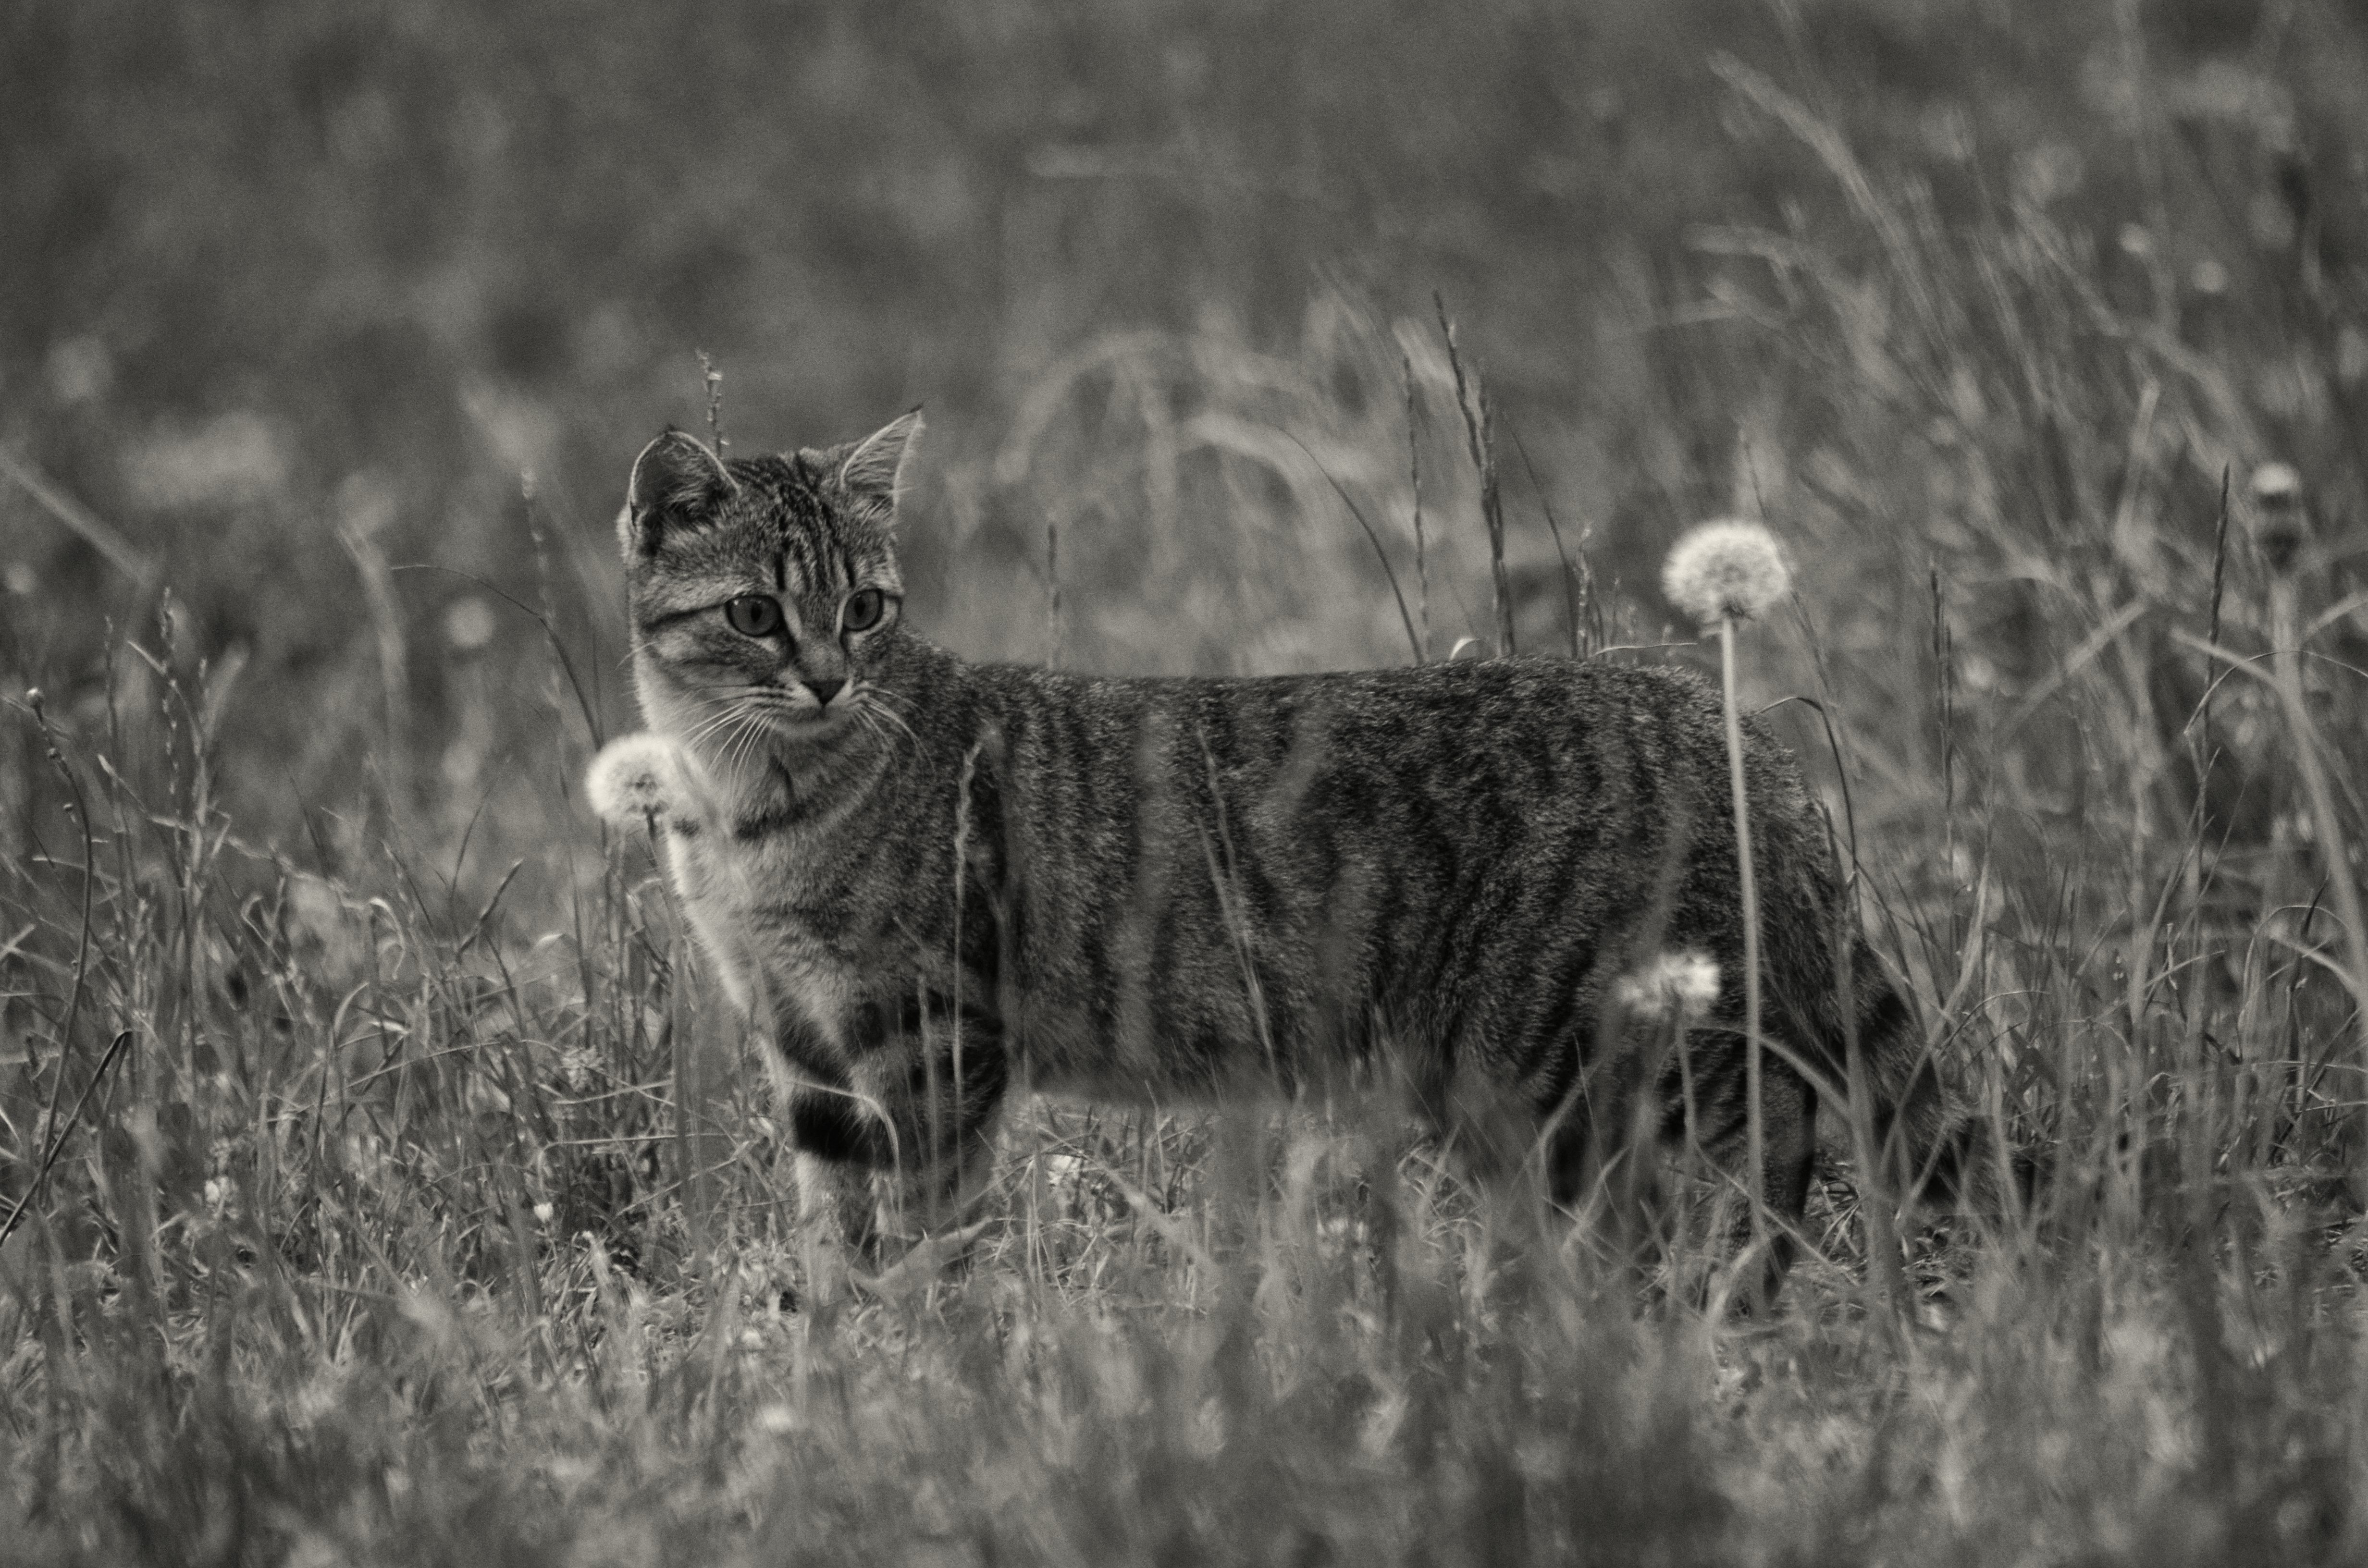 grayscale image of a cat standing on a grass field